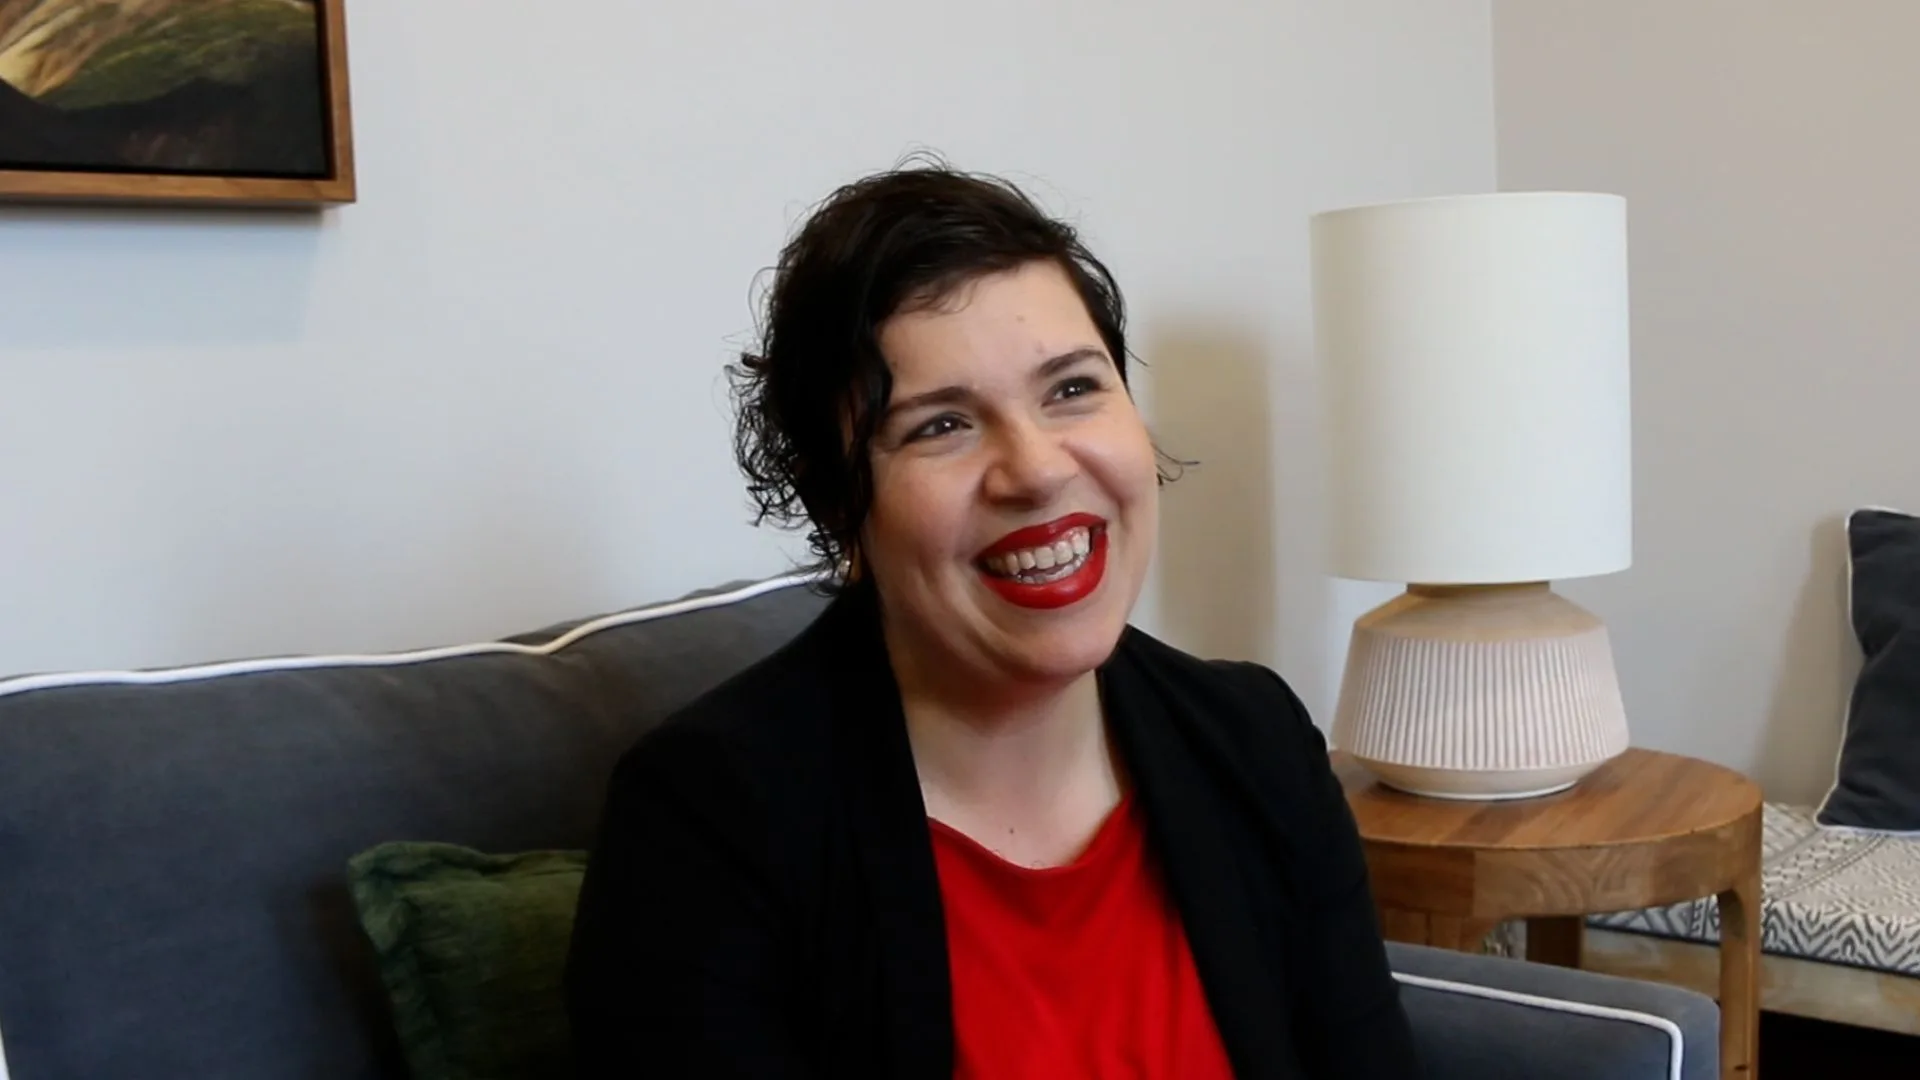 women sitting down for an interview wearing red blouse with black blazer